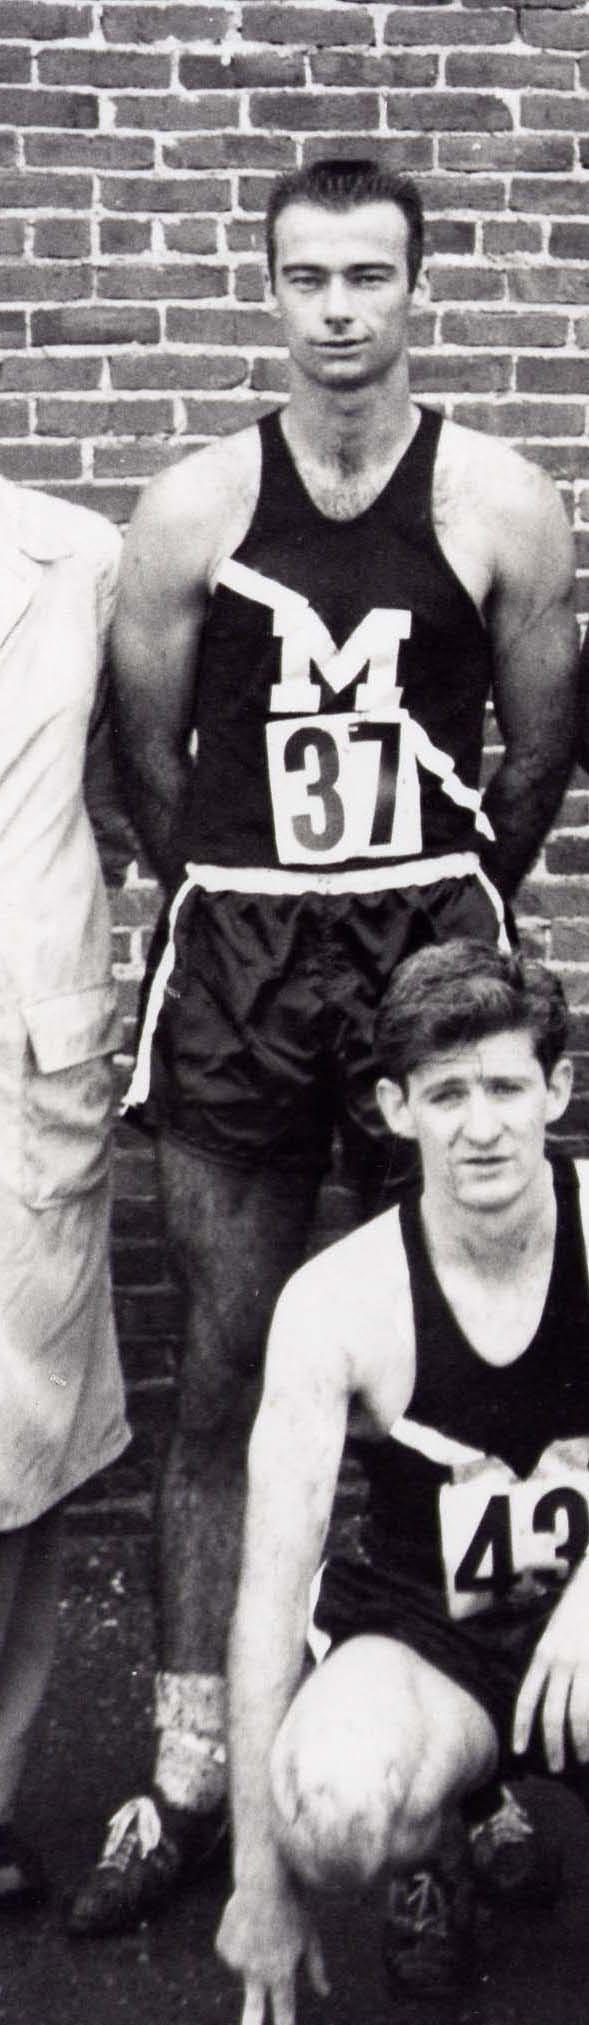 -07 MEN S CROSS UMASS COUNTRY SOCCER Pictured above is coach Ken O Brien during his 28 undergrad days at UMass in the 1963 team photo. Cross Country YEARLY FINISHES 1980 1. Rutgers 19 2. UMass 55 3.